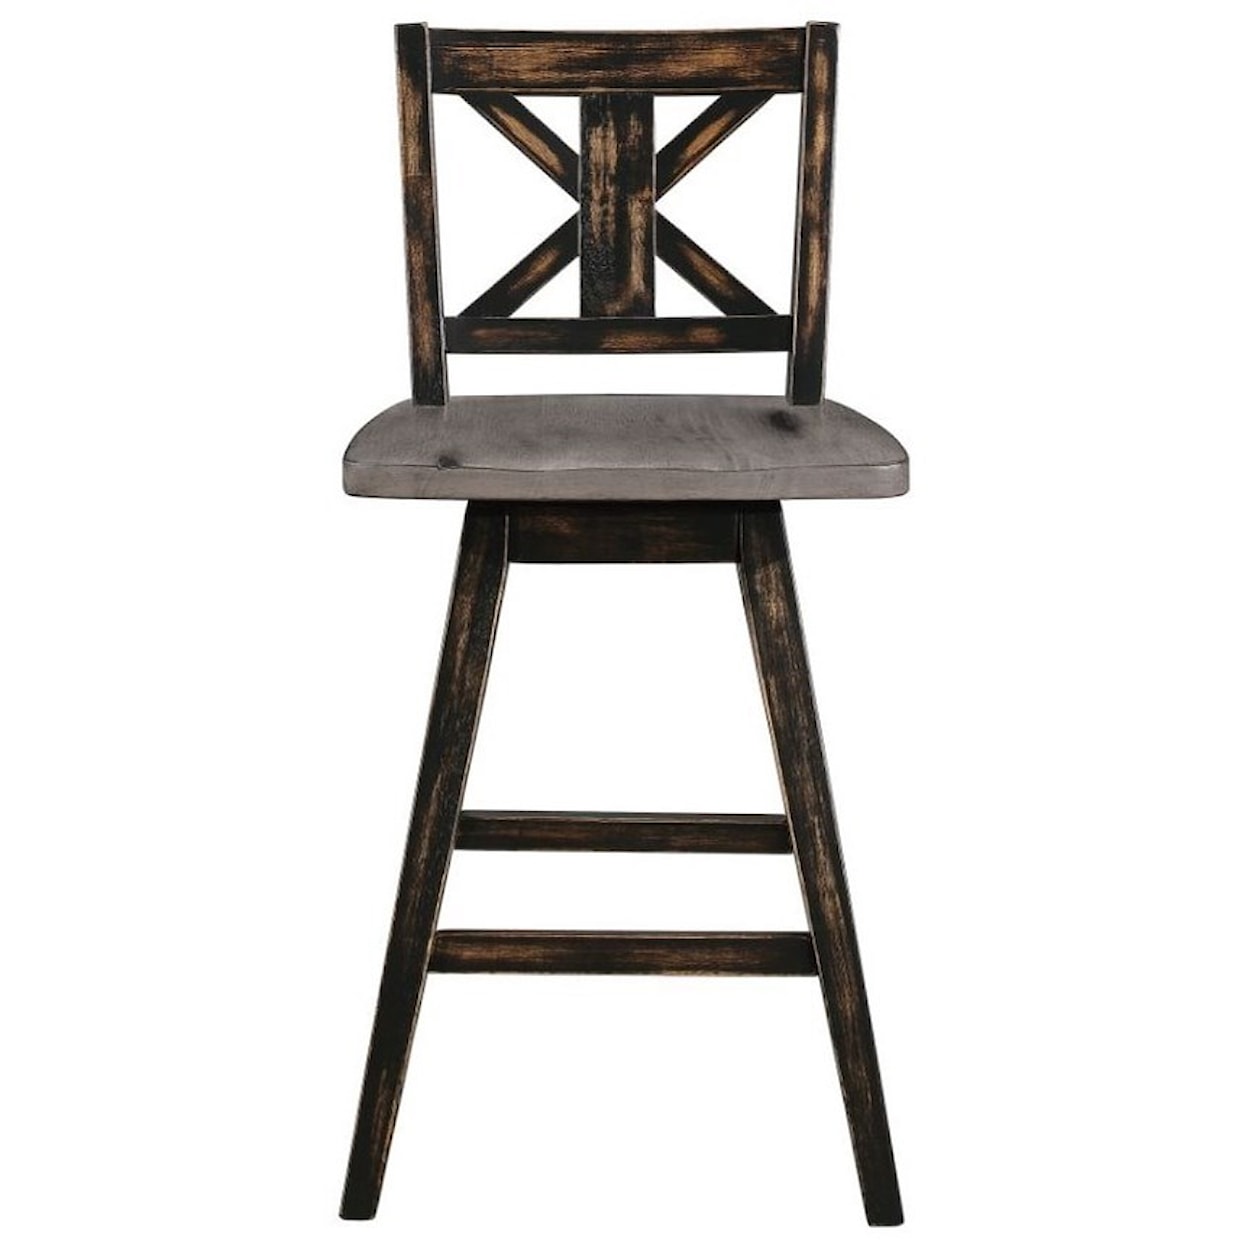 Home Style Neo Black Counter height swivel barstool